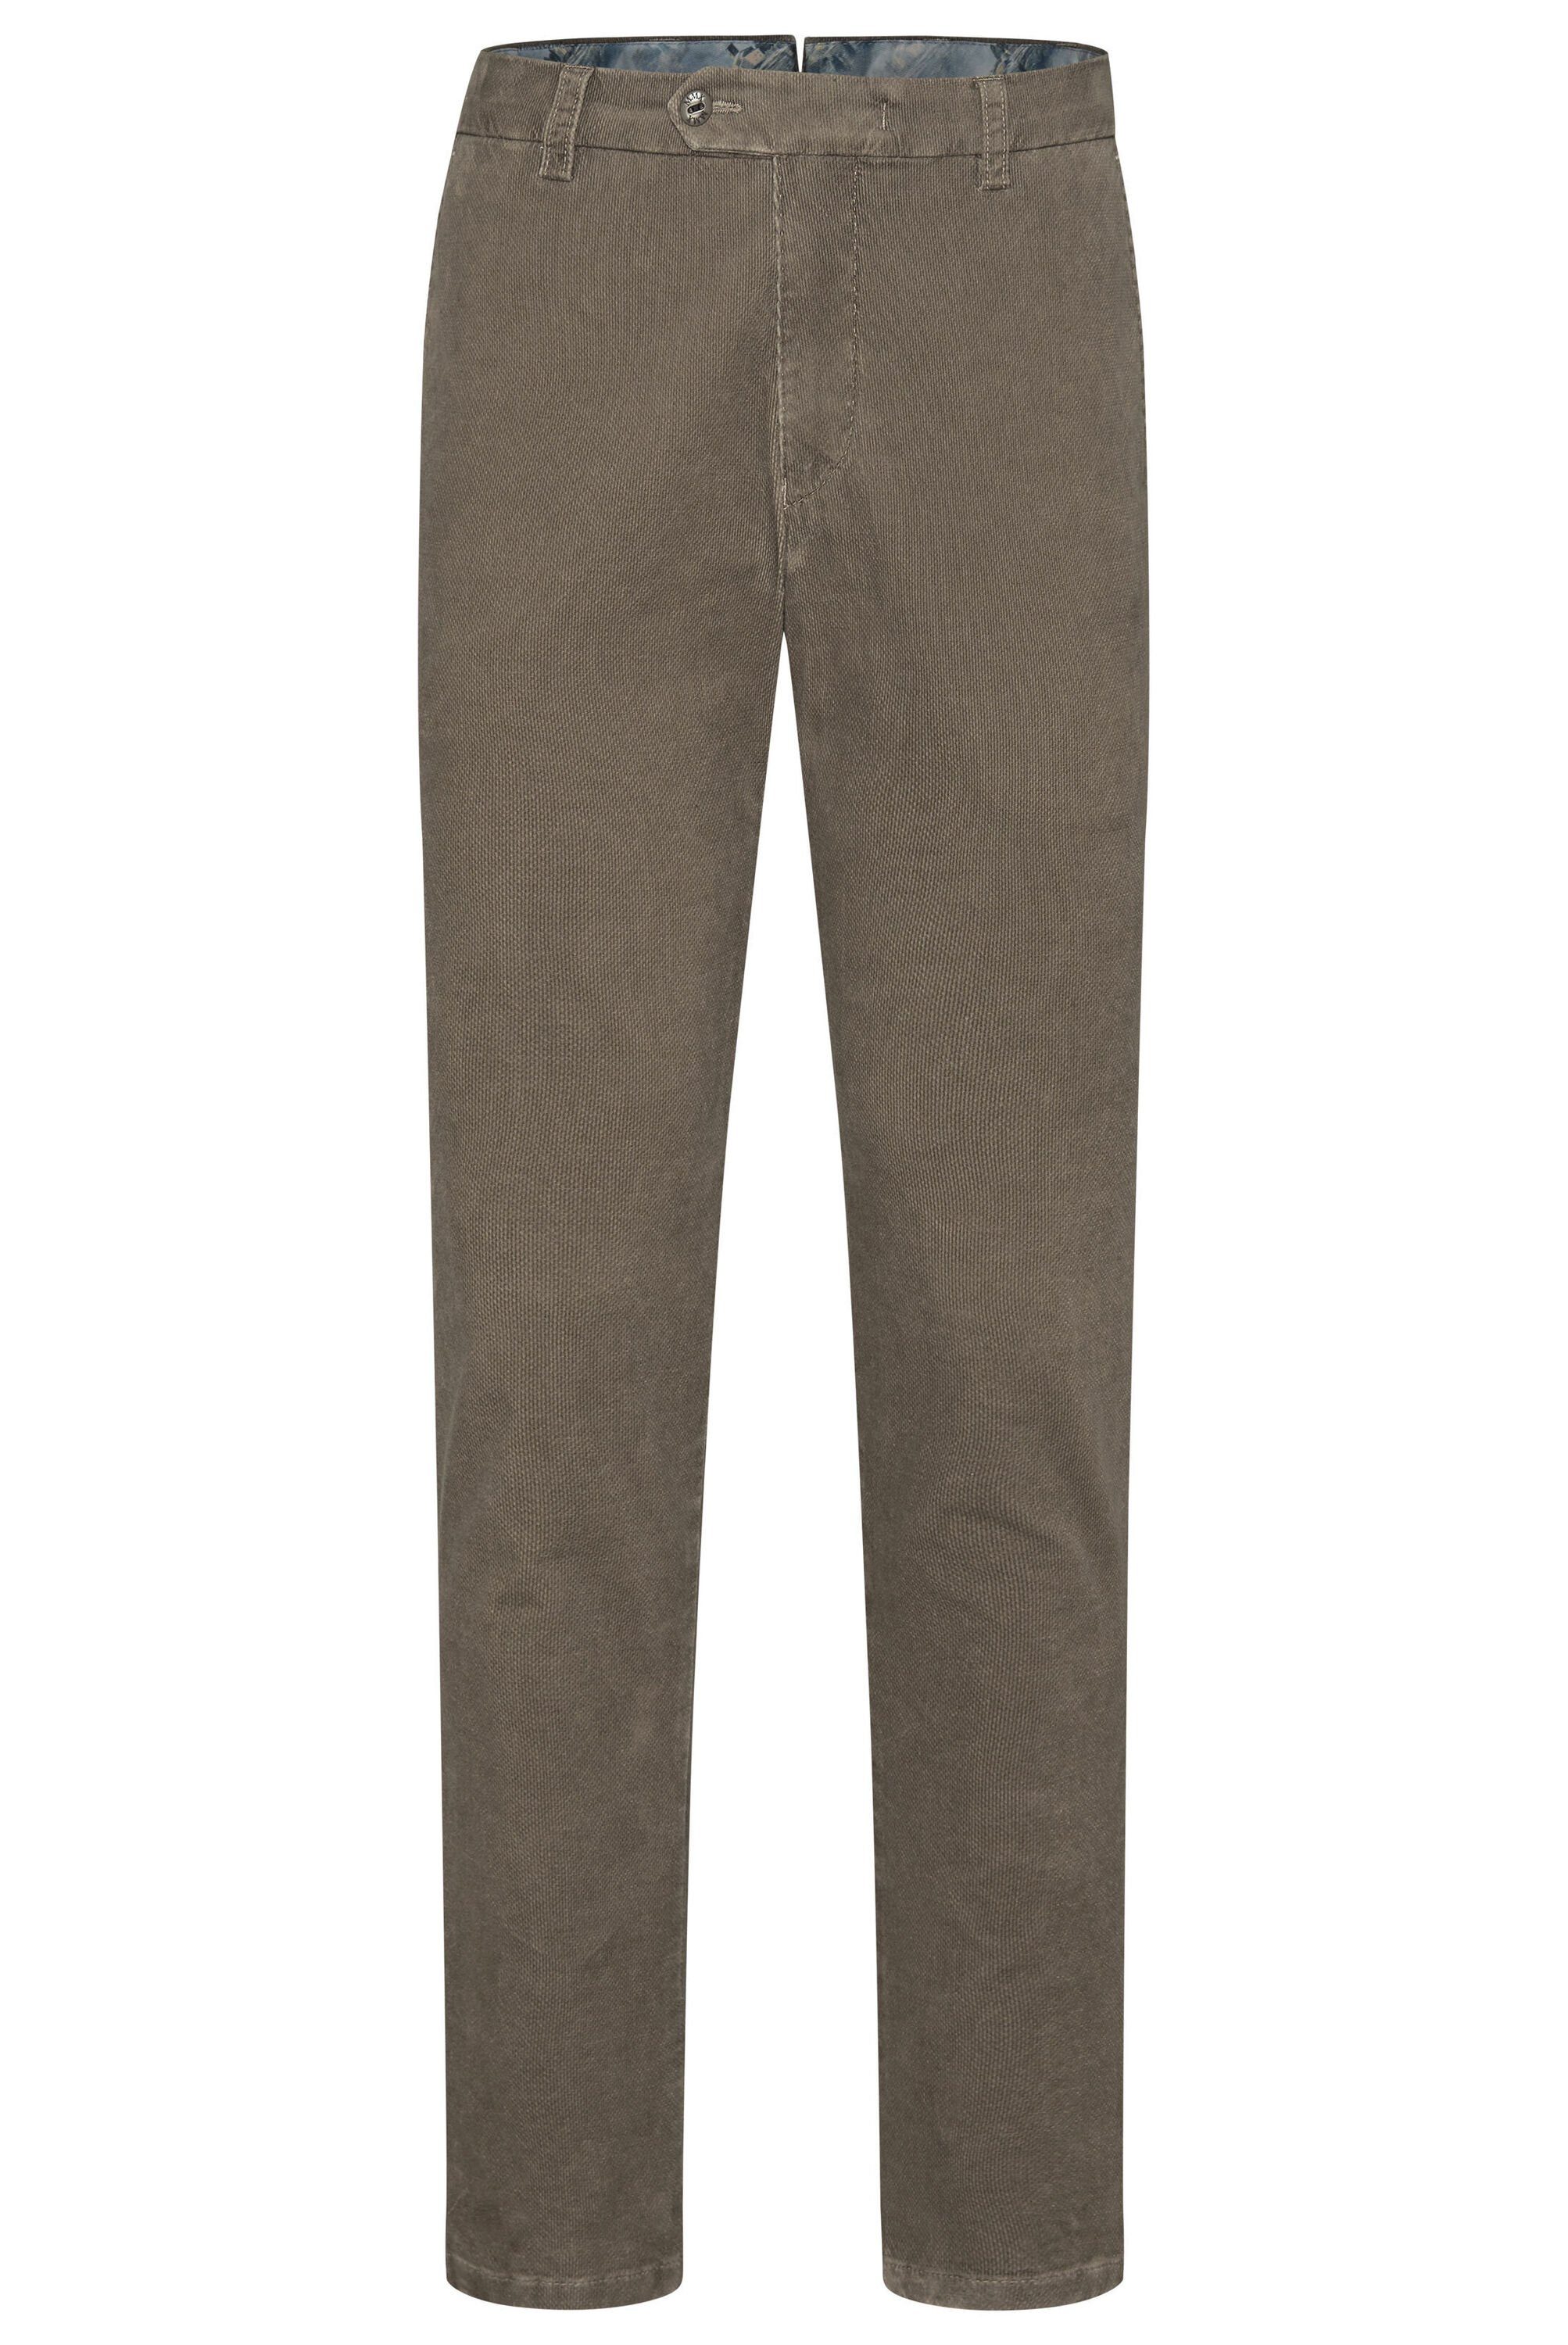 Silhouette Chinohose MMX taupe in schlanker